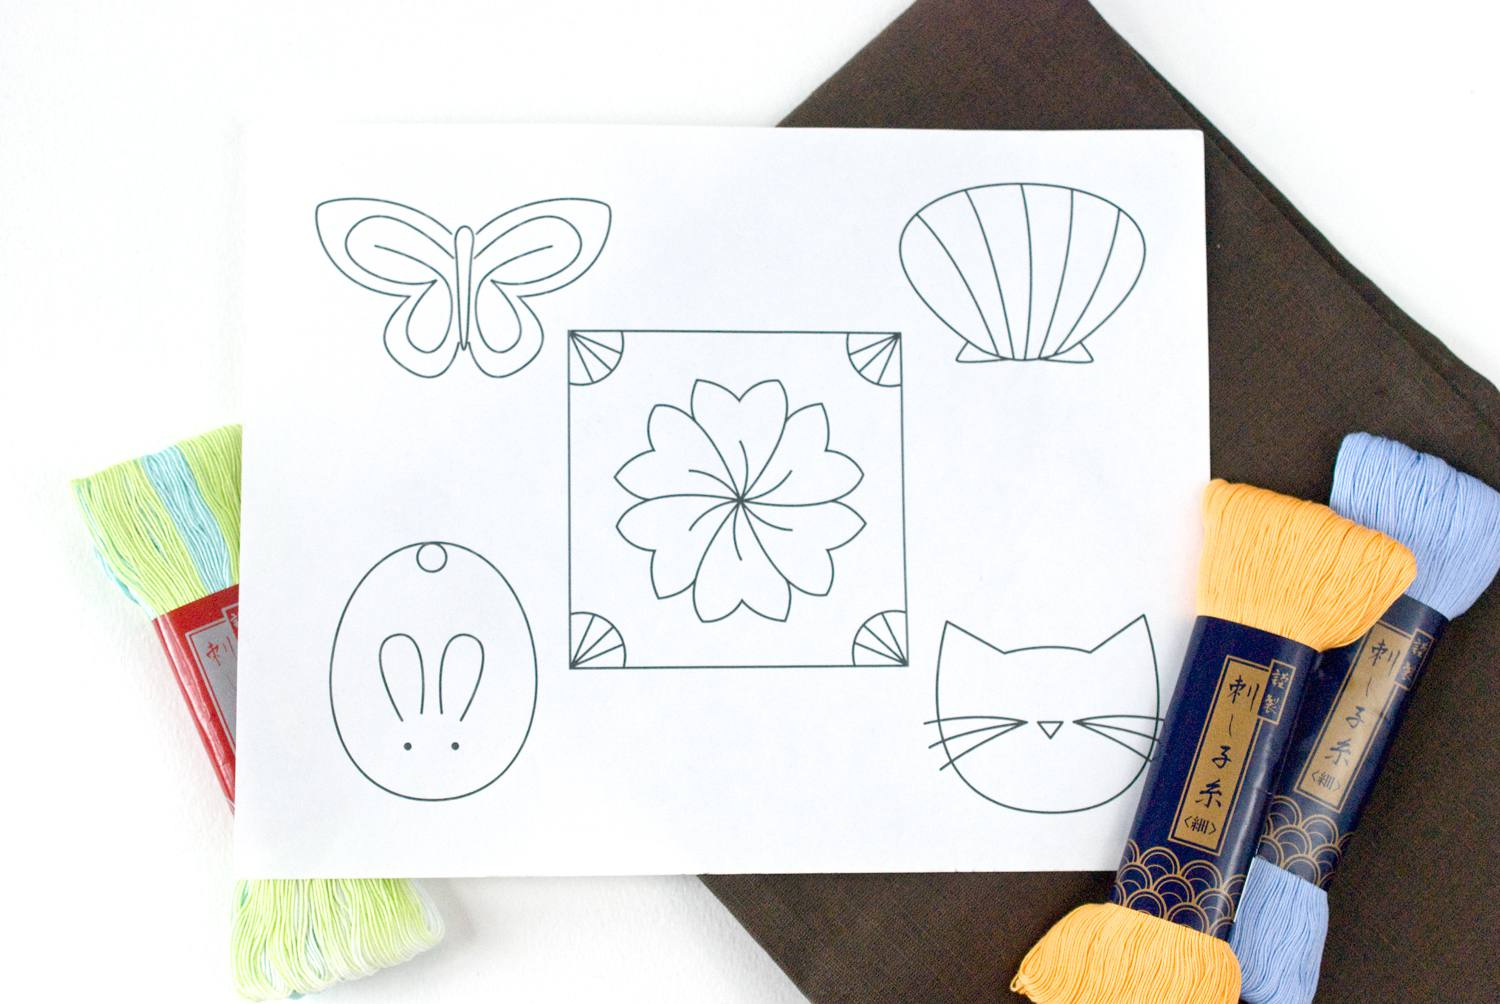 Printable Embroidery Patterns 10 Free Embroidery Patterns For Beginners